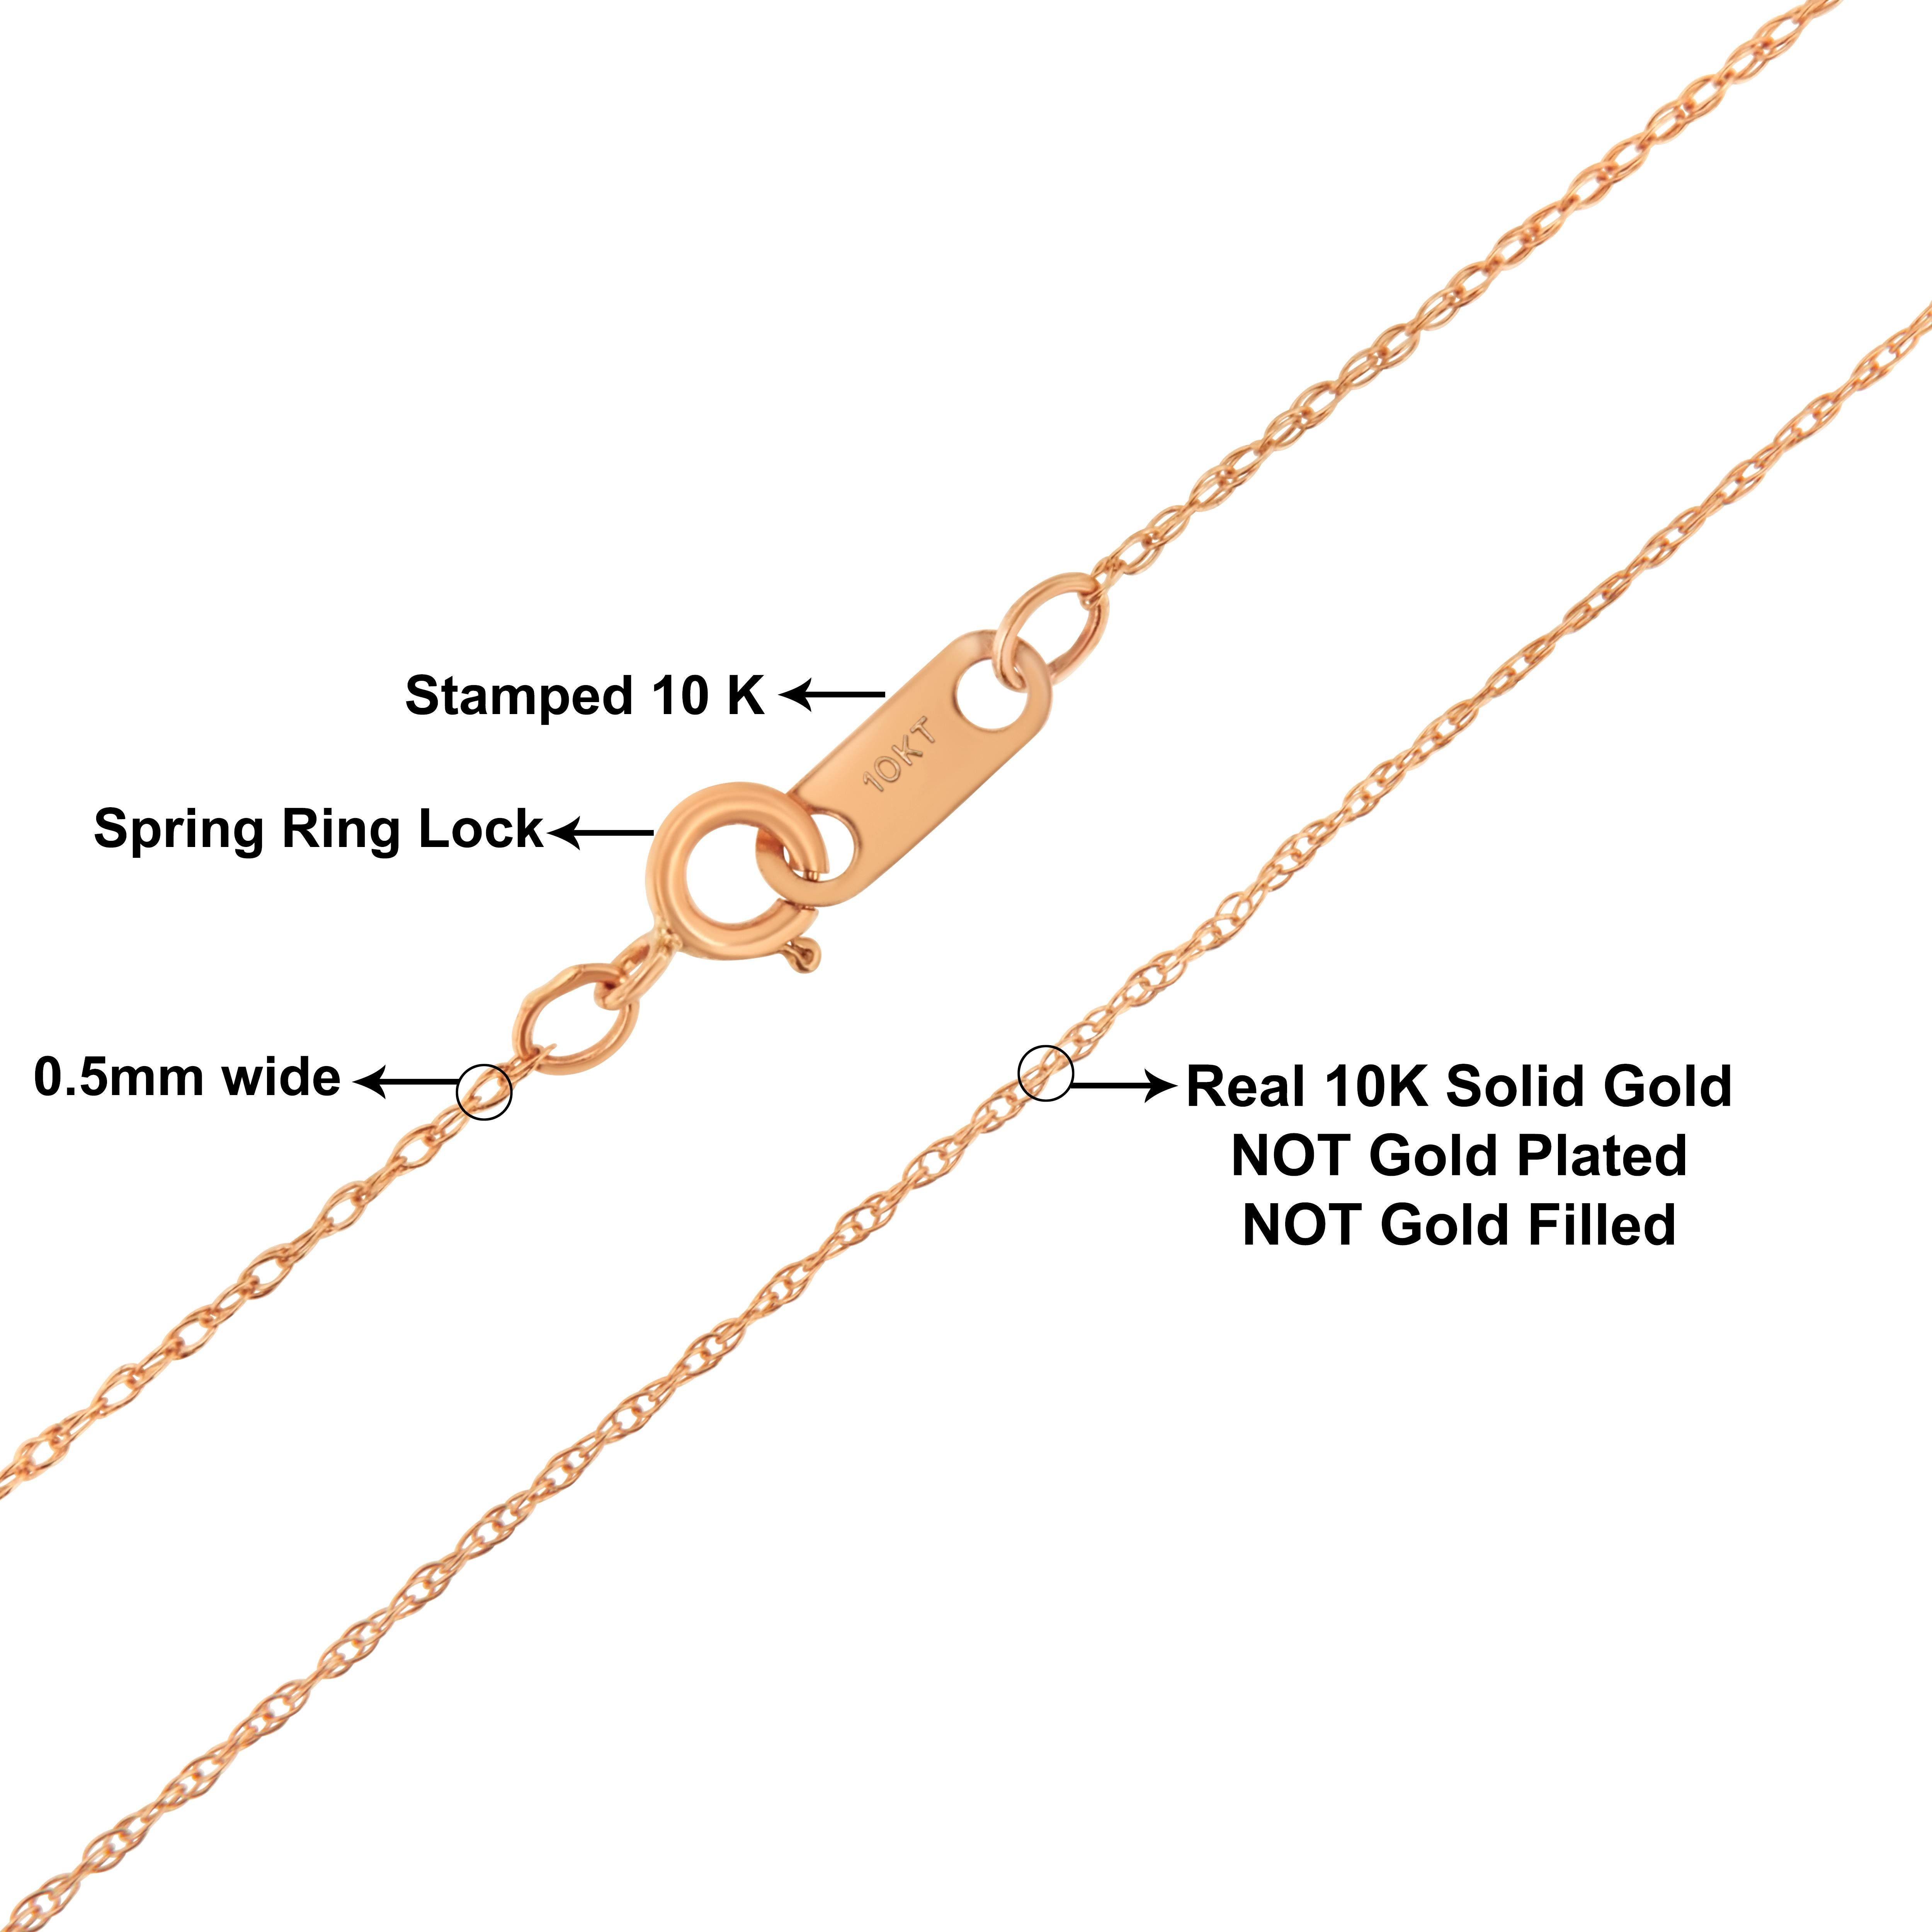 A simple and dainty 10K rose gold rope chain measuring 18 inches in length fastens securely with a standard spring ring clasp. This chain can replace most chains and is perfect paired with small to medium size pendants. The chain measures